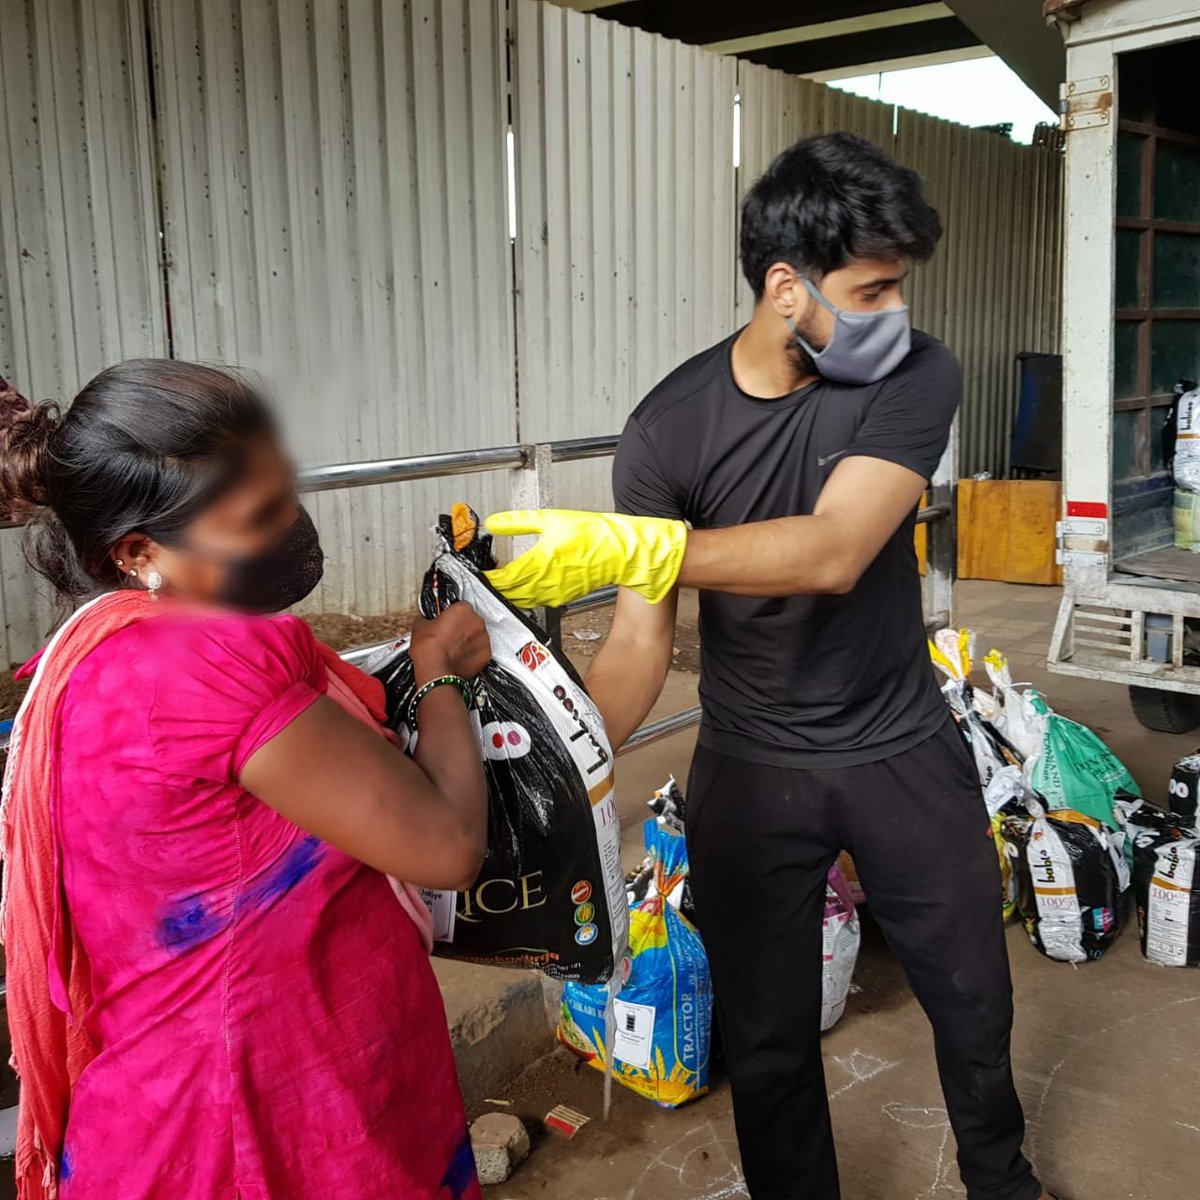 *As we progress, we will focus on groceries. Our first batch of groceries are being distributedBased on the expansion, we have activated our Report Hunger initiative. This allows anyone to report a distress call from the Mumbai Metropolitan Region http://bit.ly/KCReportHunger 4/8